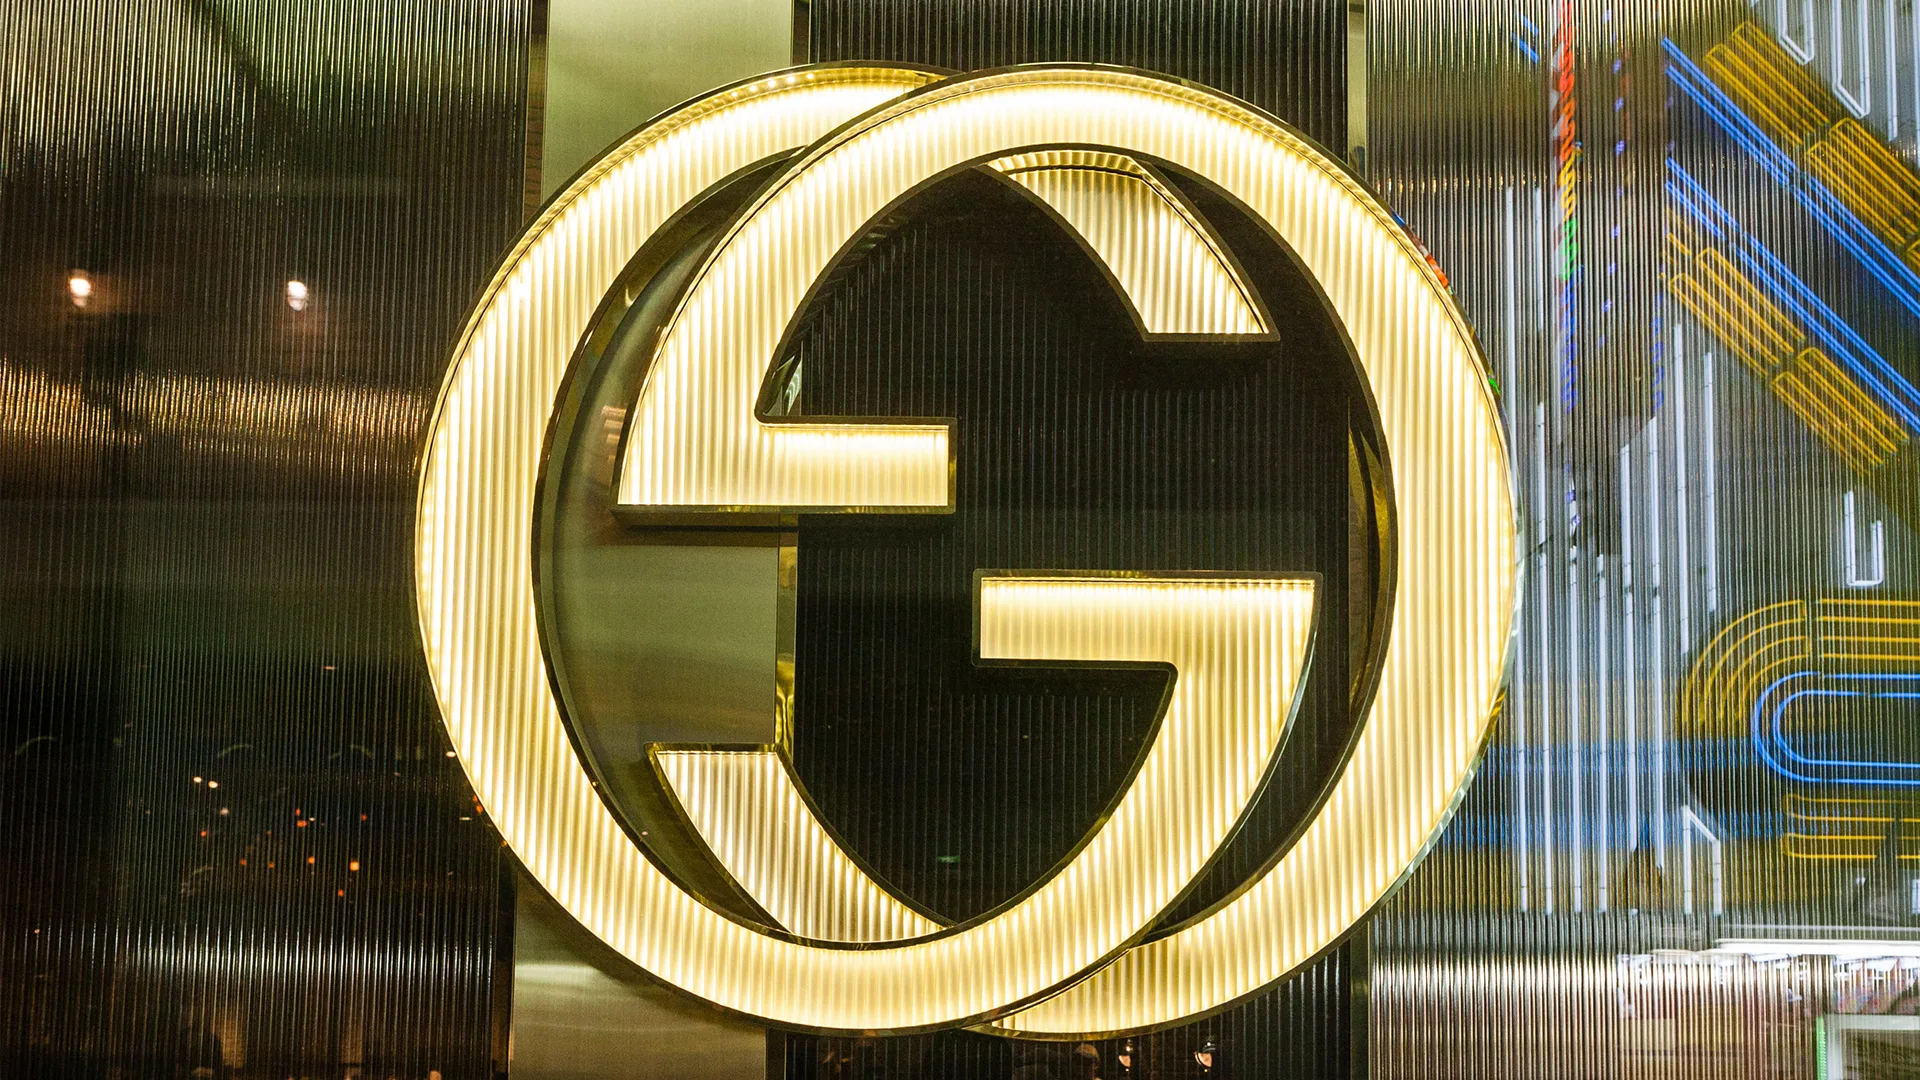 Gold Gucci logo on the side of a glass building